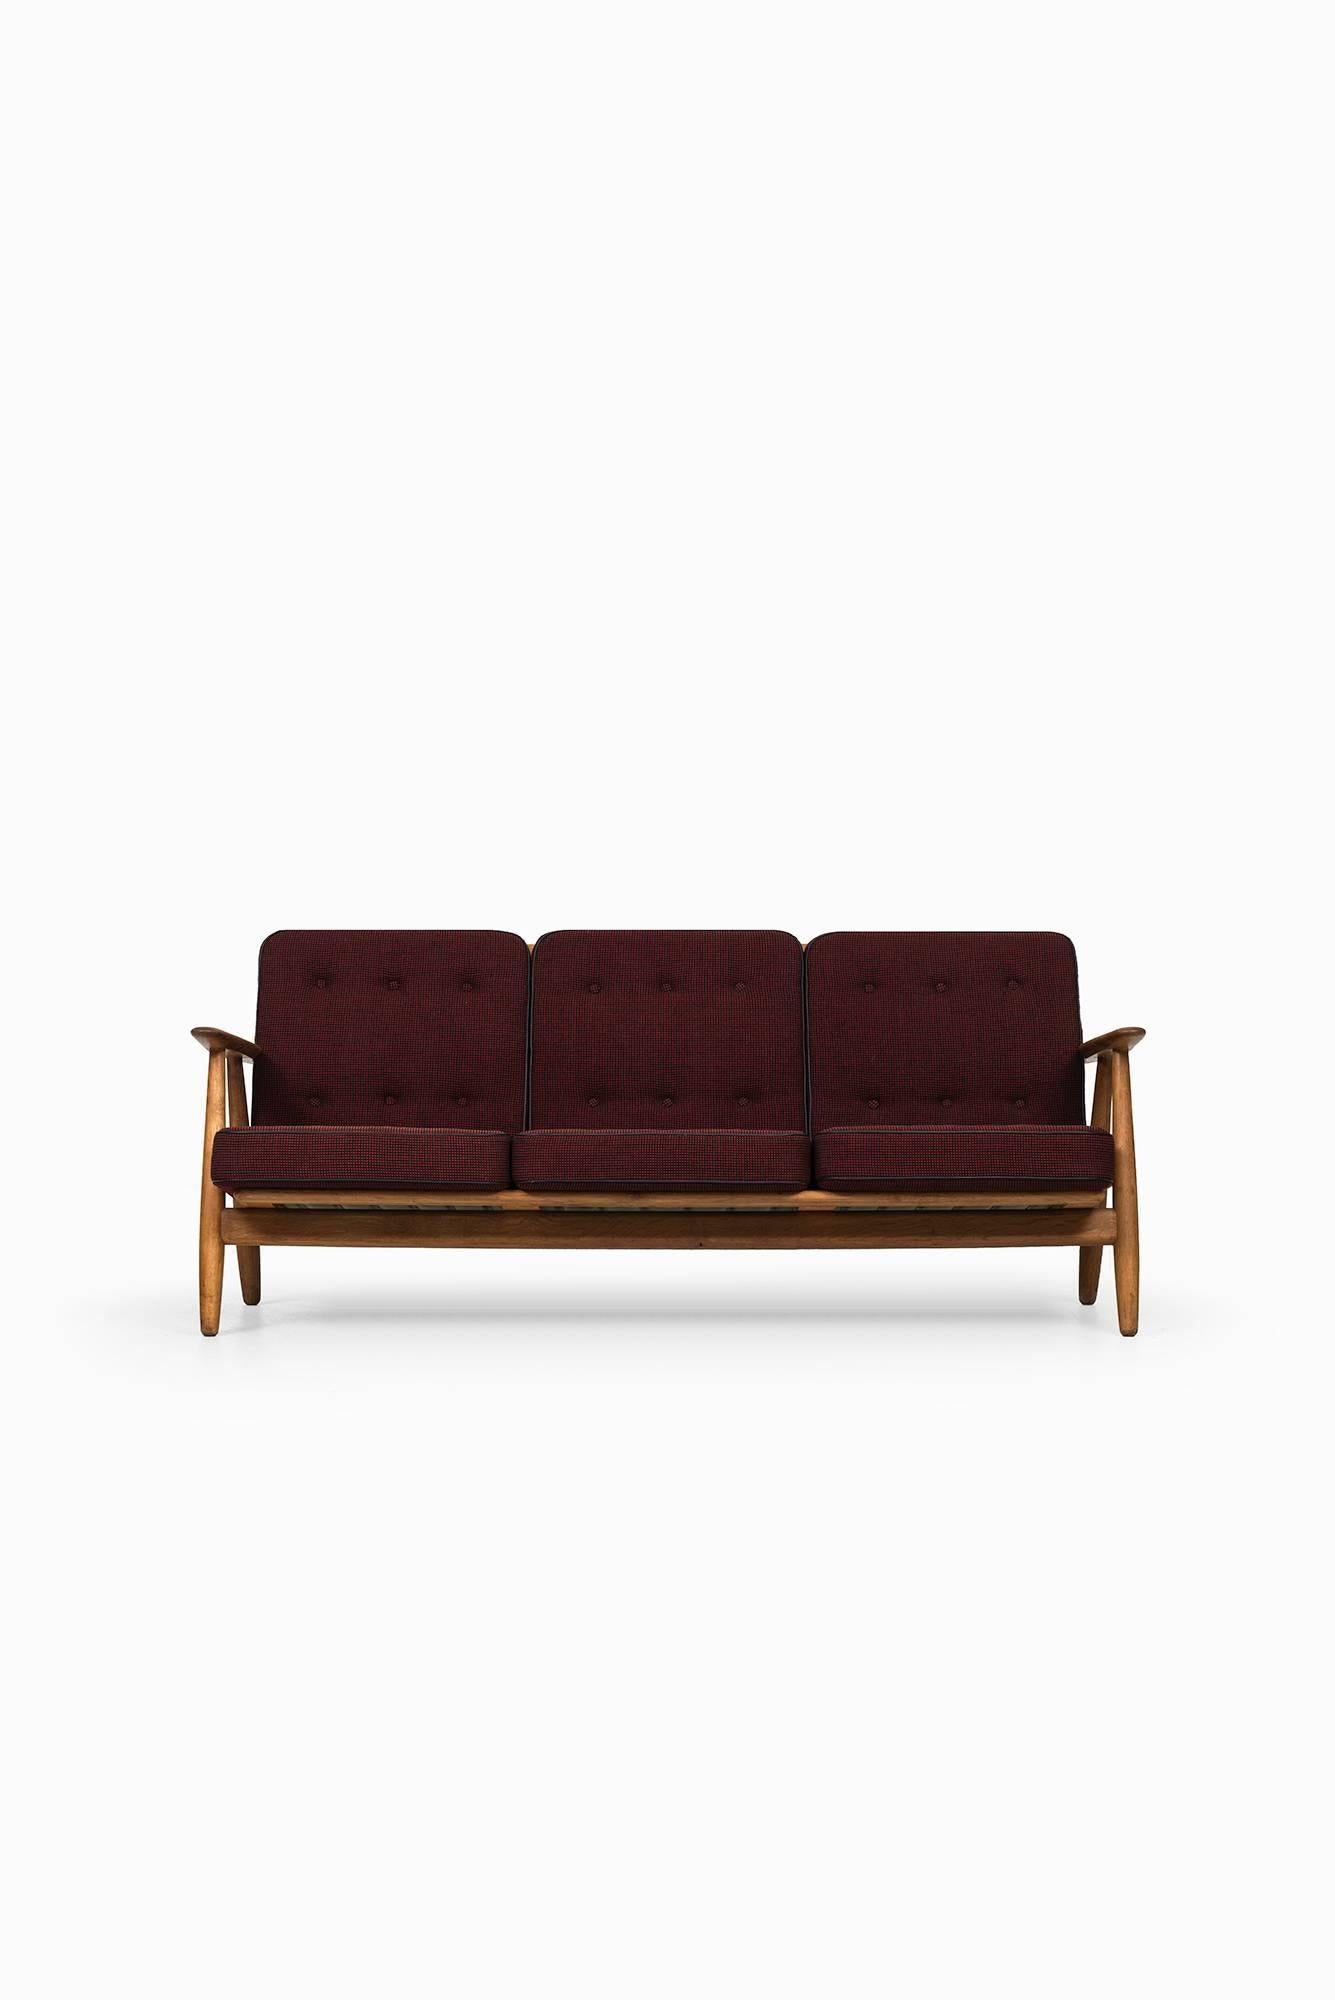 Sofa model GE-240/cigar designed by Hans Wegner. Produced by GETAMA in Denmark. Original fabric with leather piping.